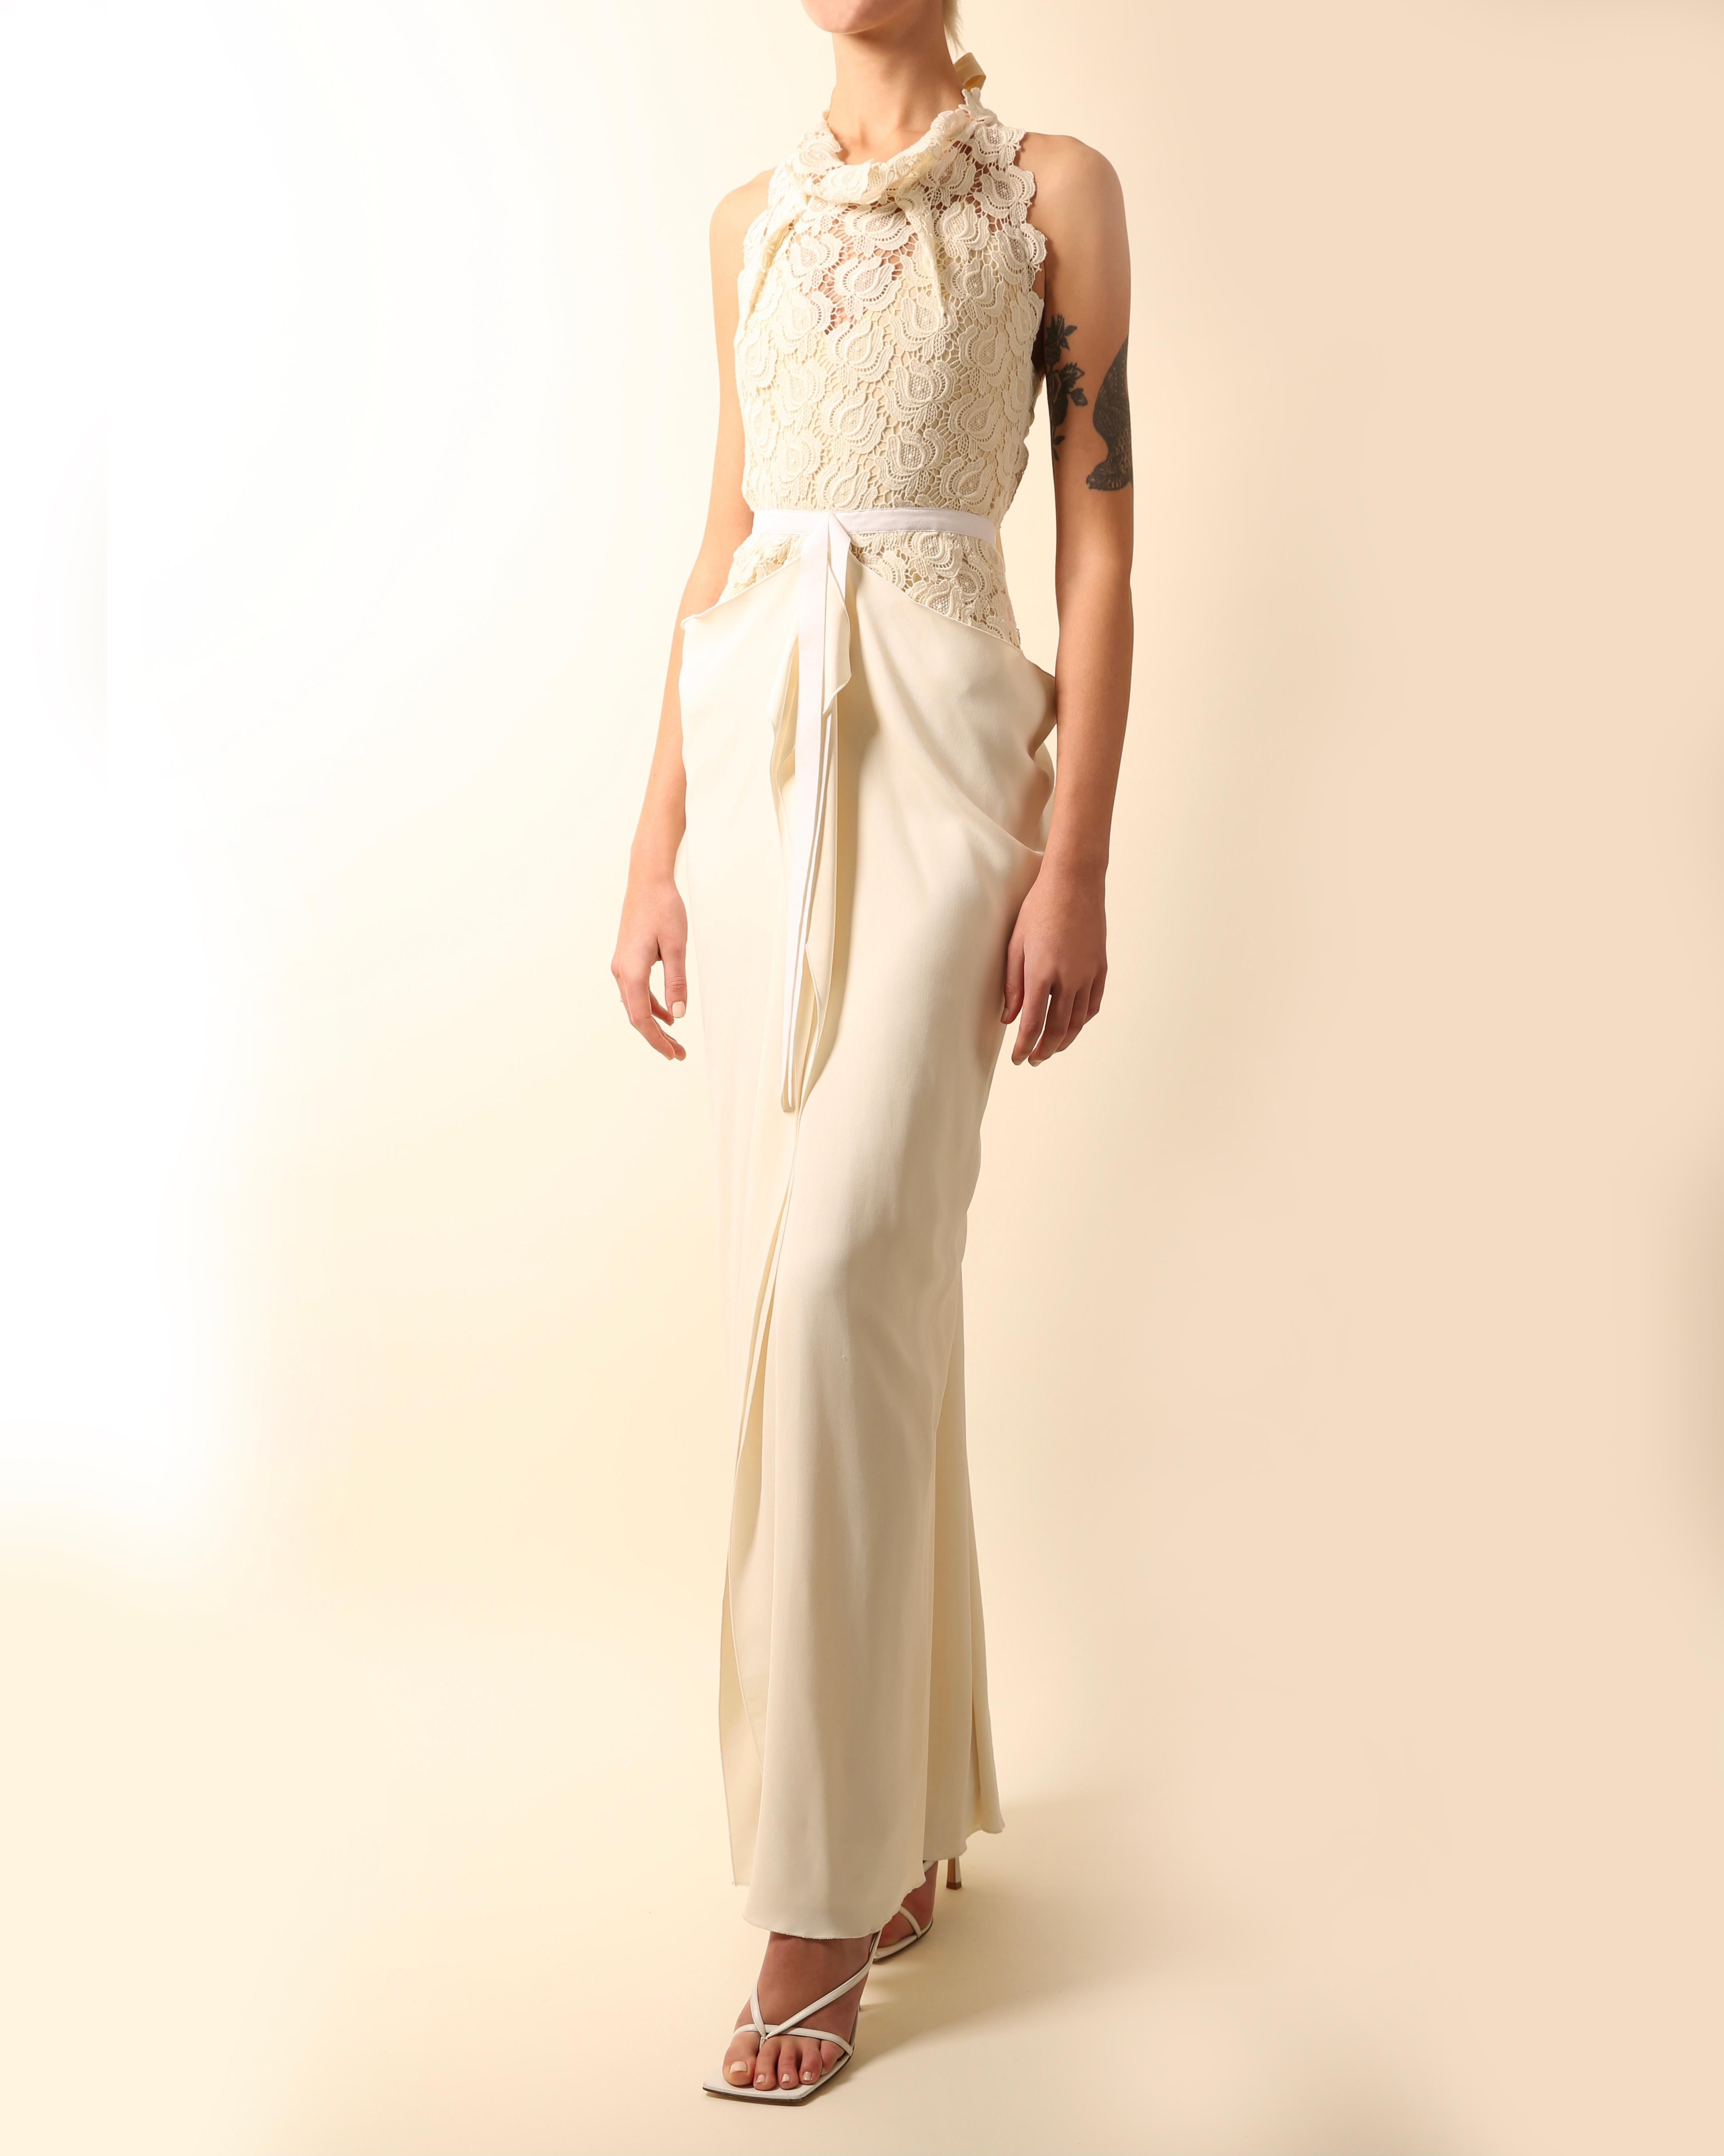 Roland Mouret ivory cream lace halter ribbon tie cut out backless wedding dress 1